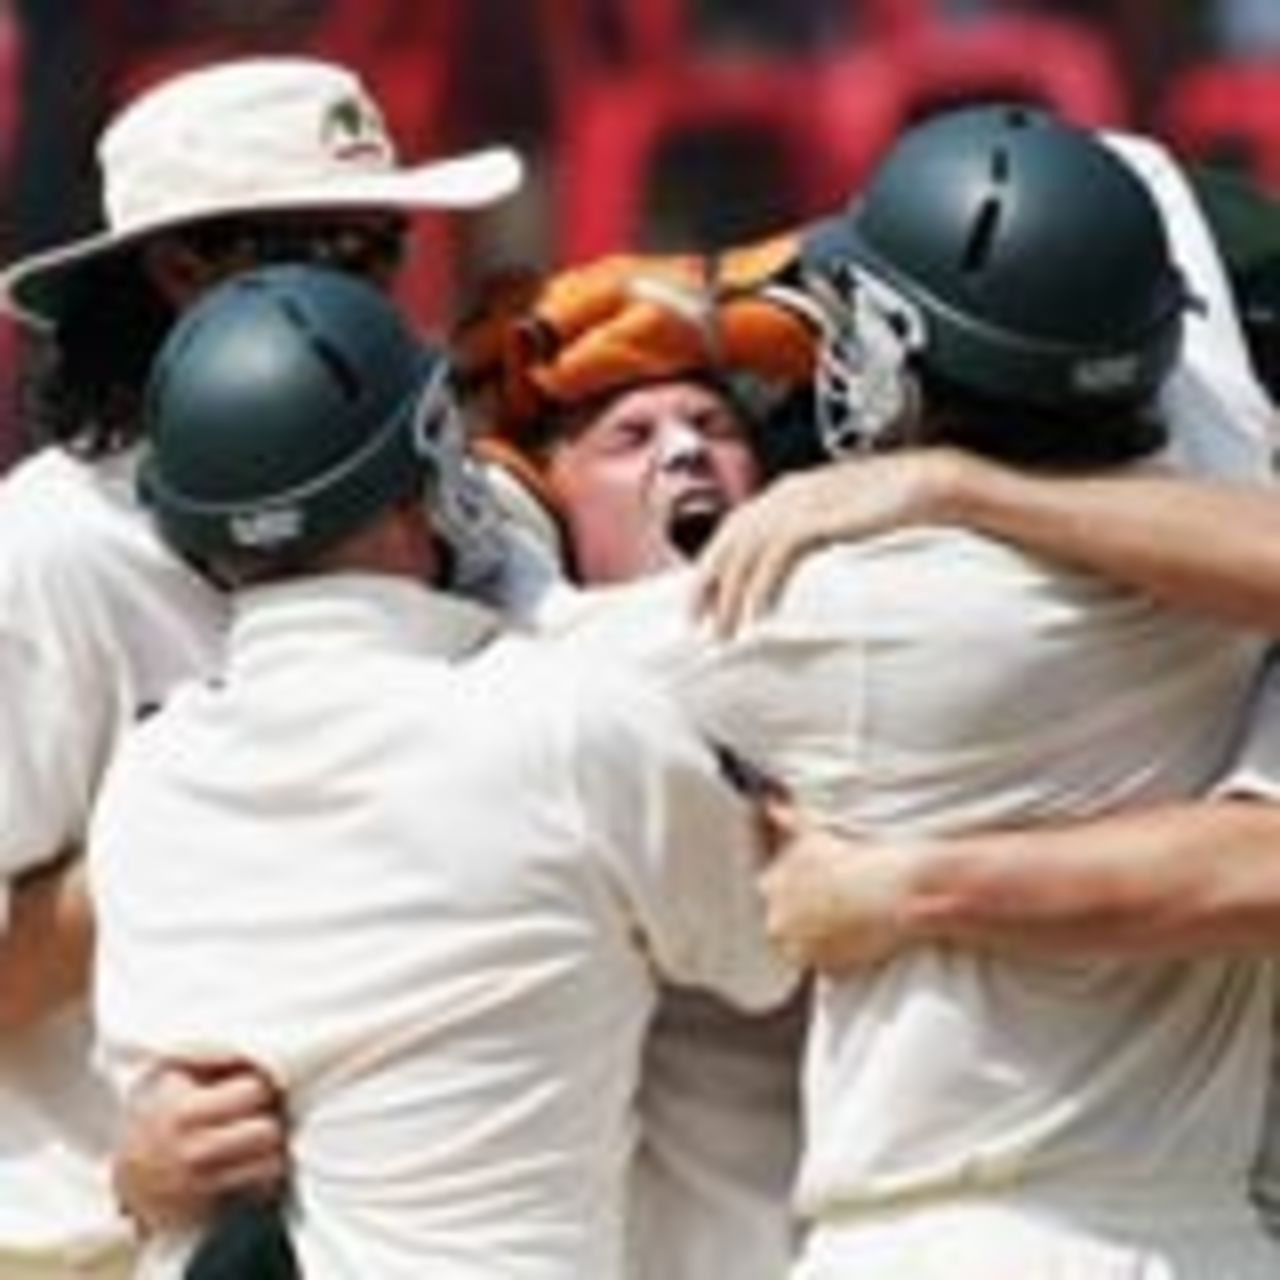 Shane Warne is hugged after he picked up the vital wicket of VVS Laxman, India v Australia, 1st Test, Bangalore, 3rd day, October 9, 2004